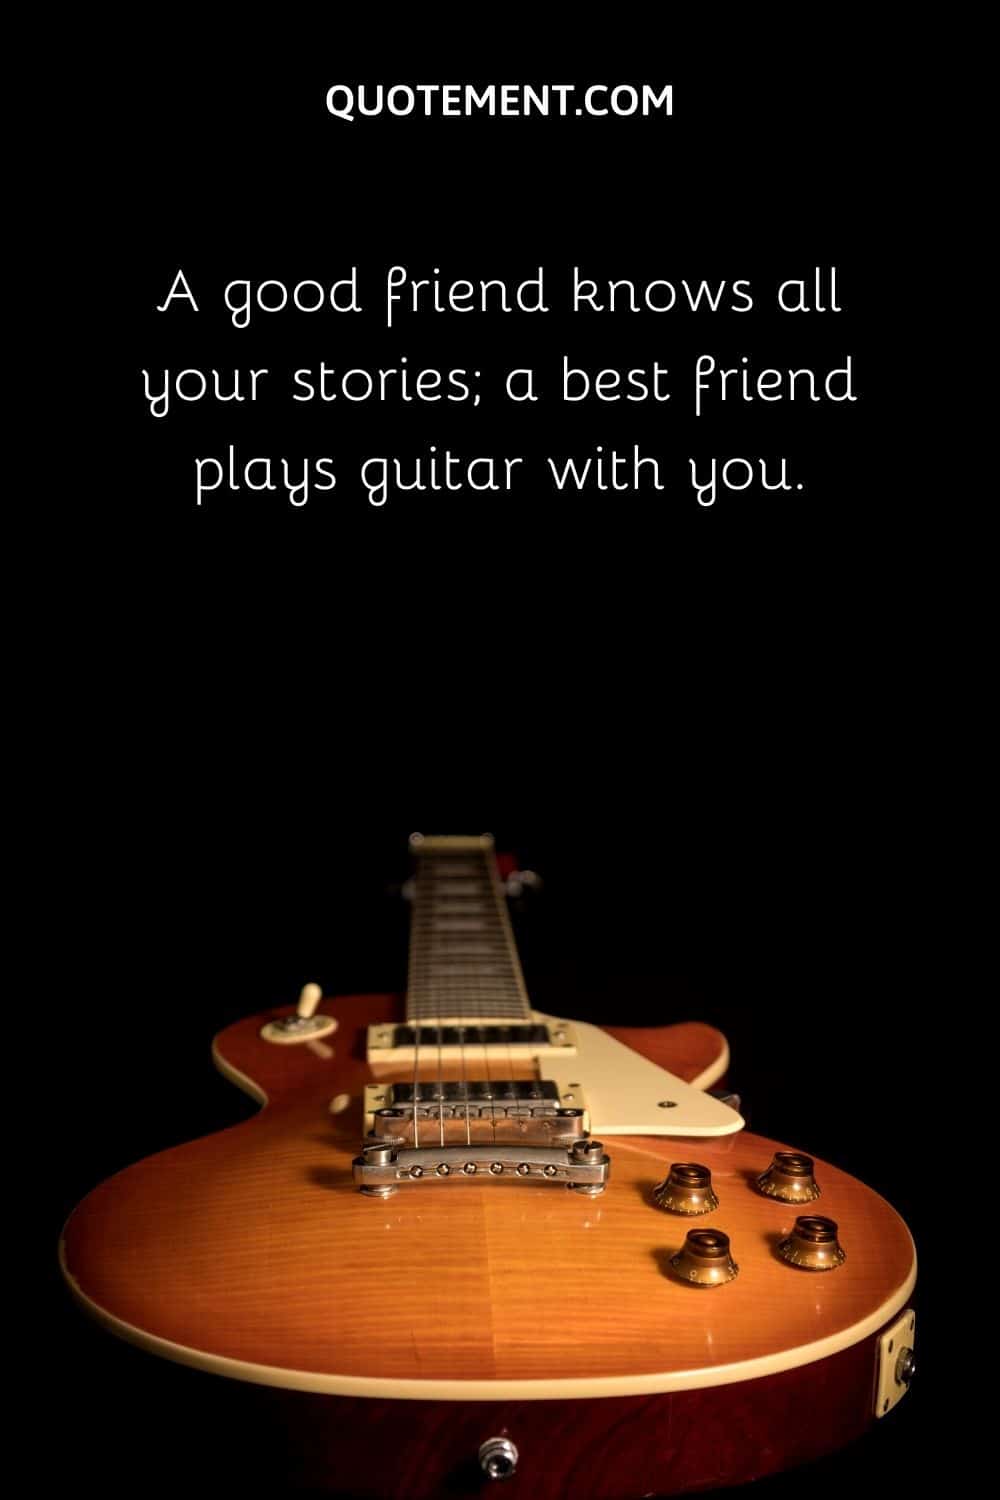 A good friend knows all your stories; a best friend plays guitar with you.